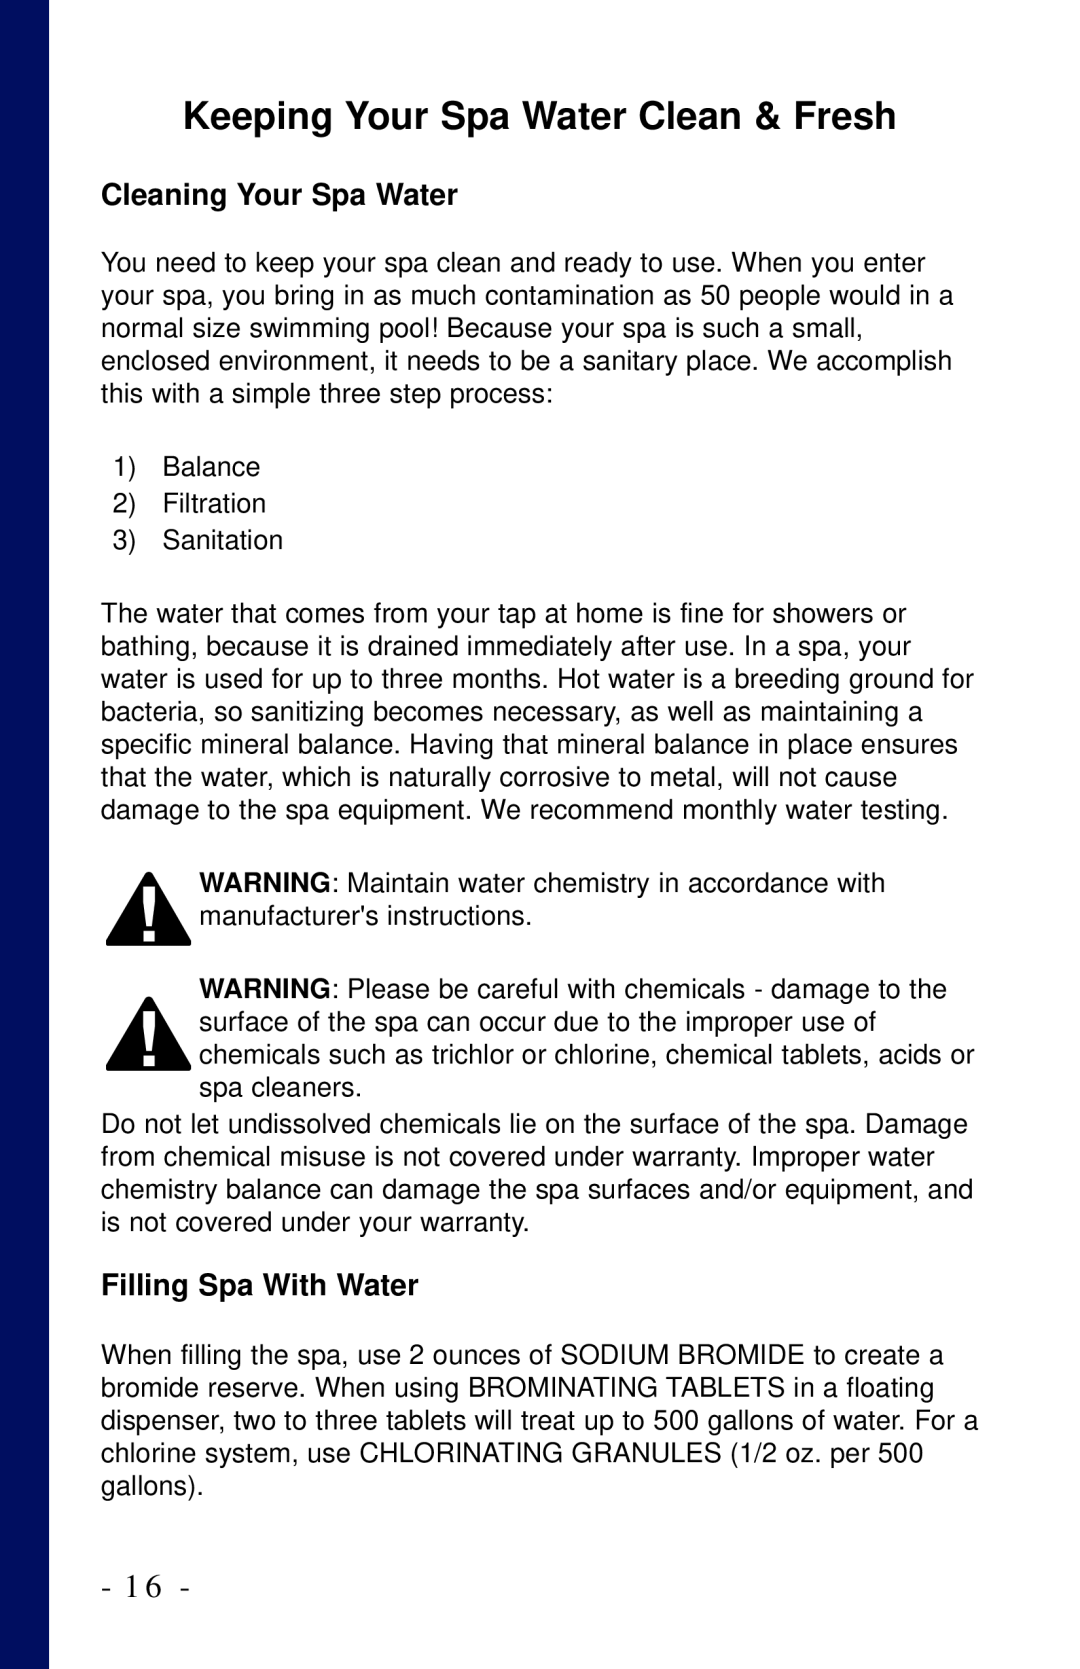 Dynasty Spas 2006 owner manual Keeping Your Spa Water Clean & Fresh, Cleaning Your Spa Water, Filling Spa With Water 